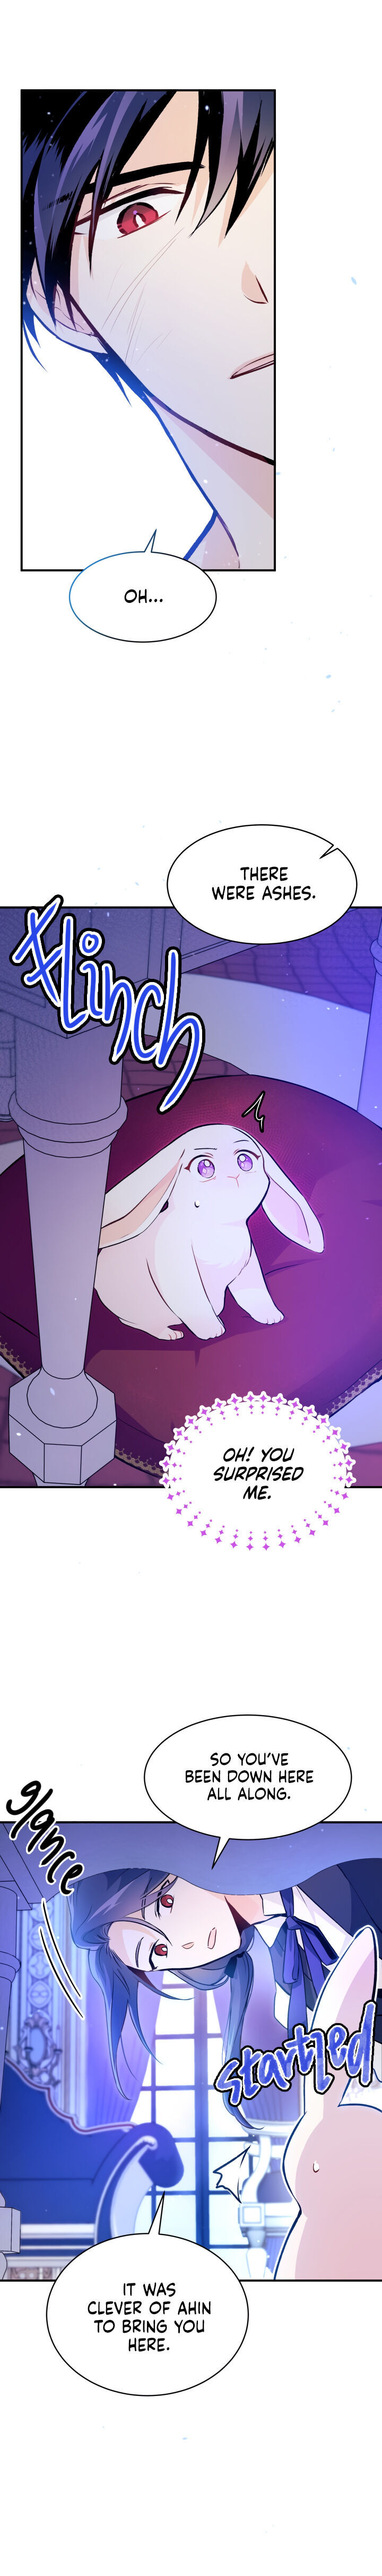 A Symbiotic Relationship Between A Rabbit And A Black Panther - Chapter 4 Page 10